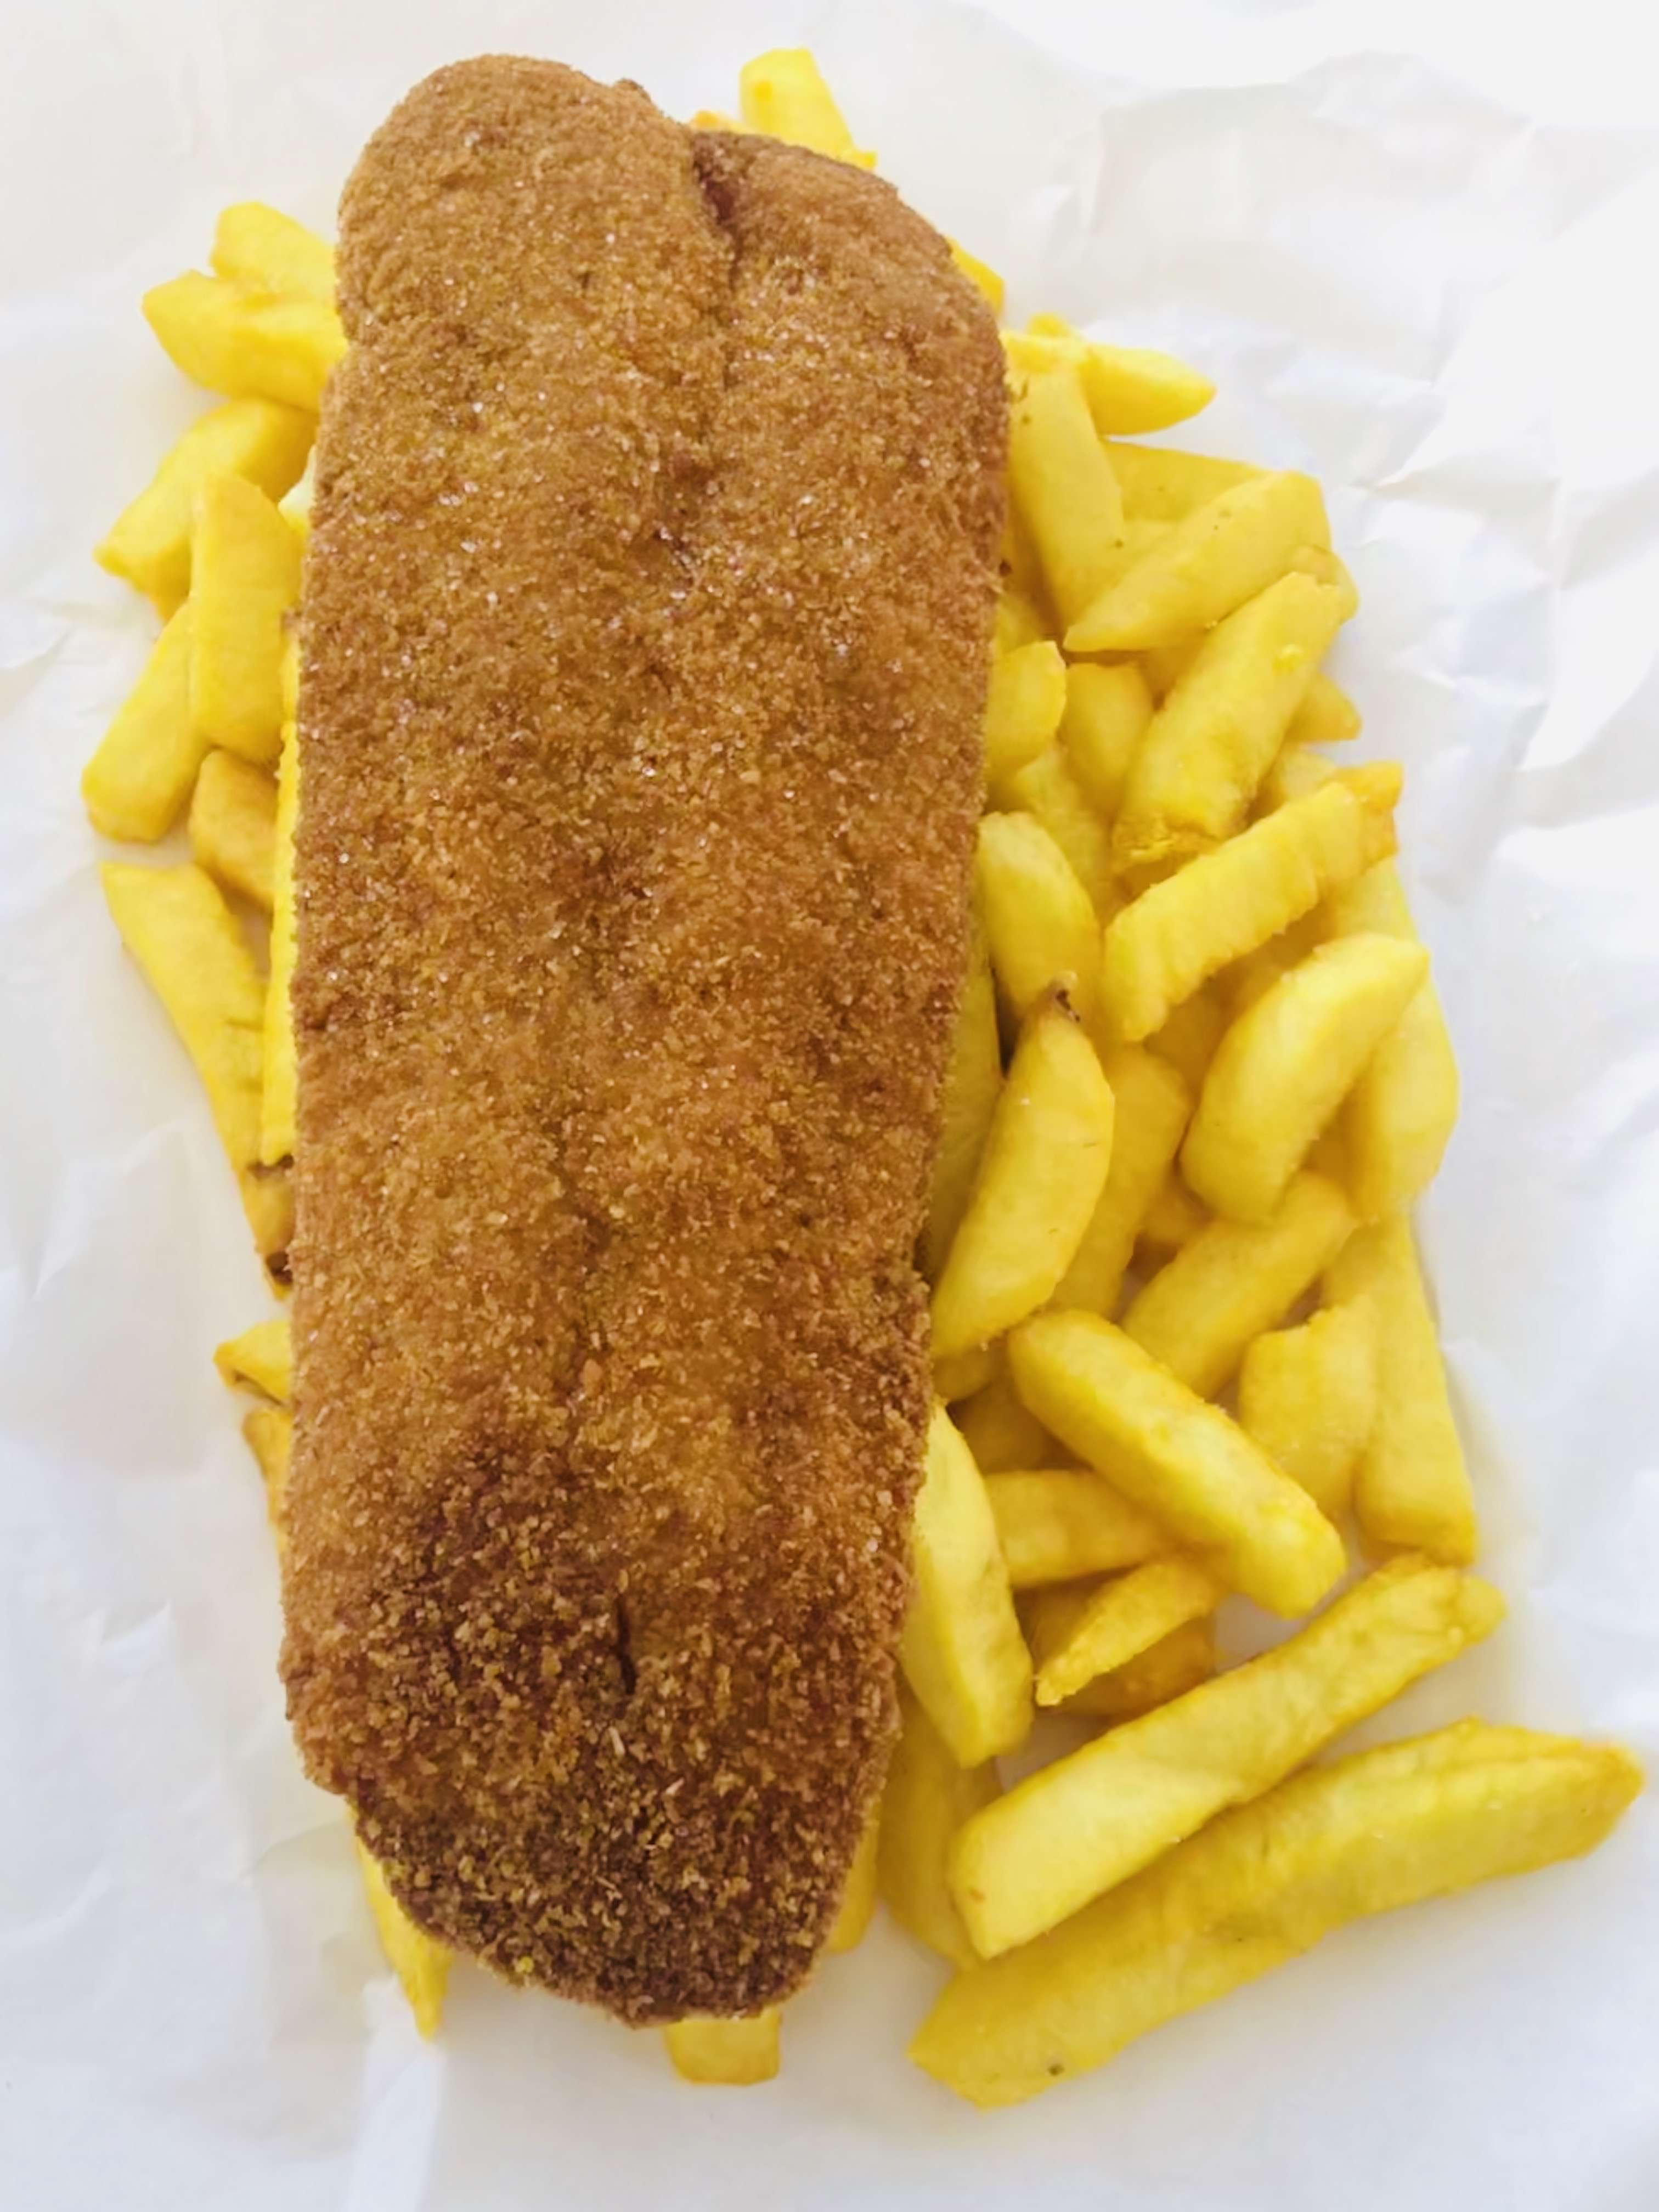 Albany Forest Fish & Chips